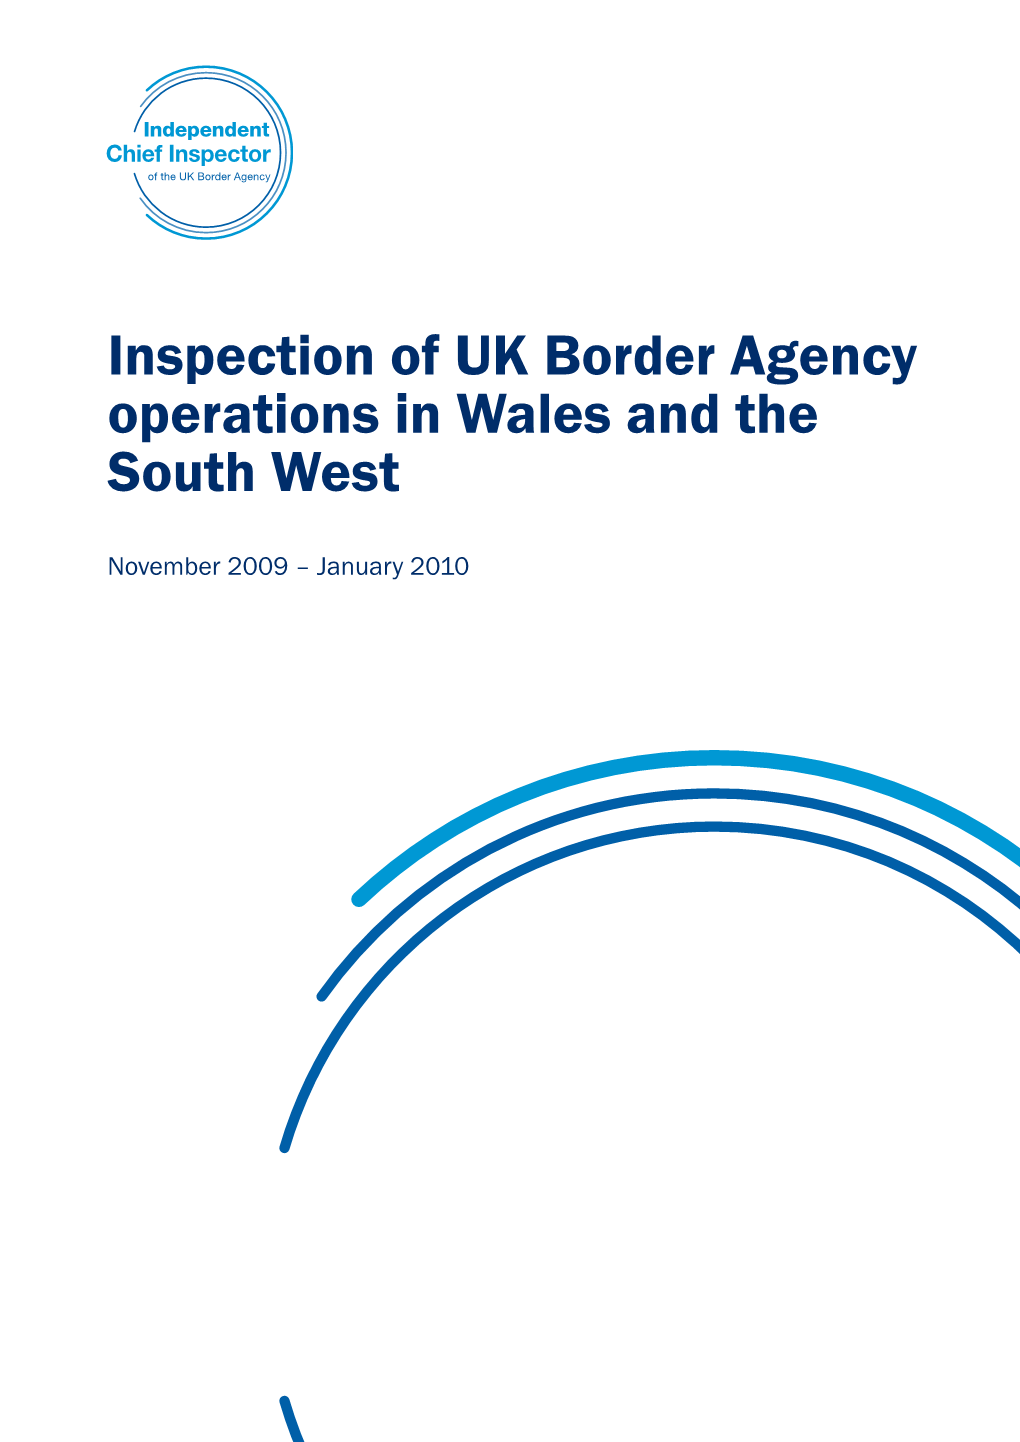 Inspection of UK Border Agency Operations in Wales and the South West